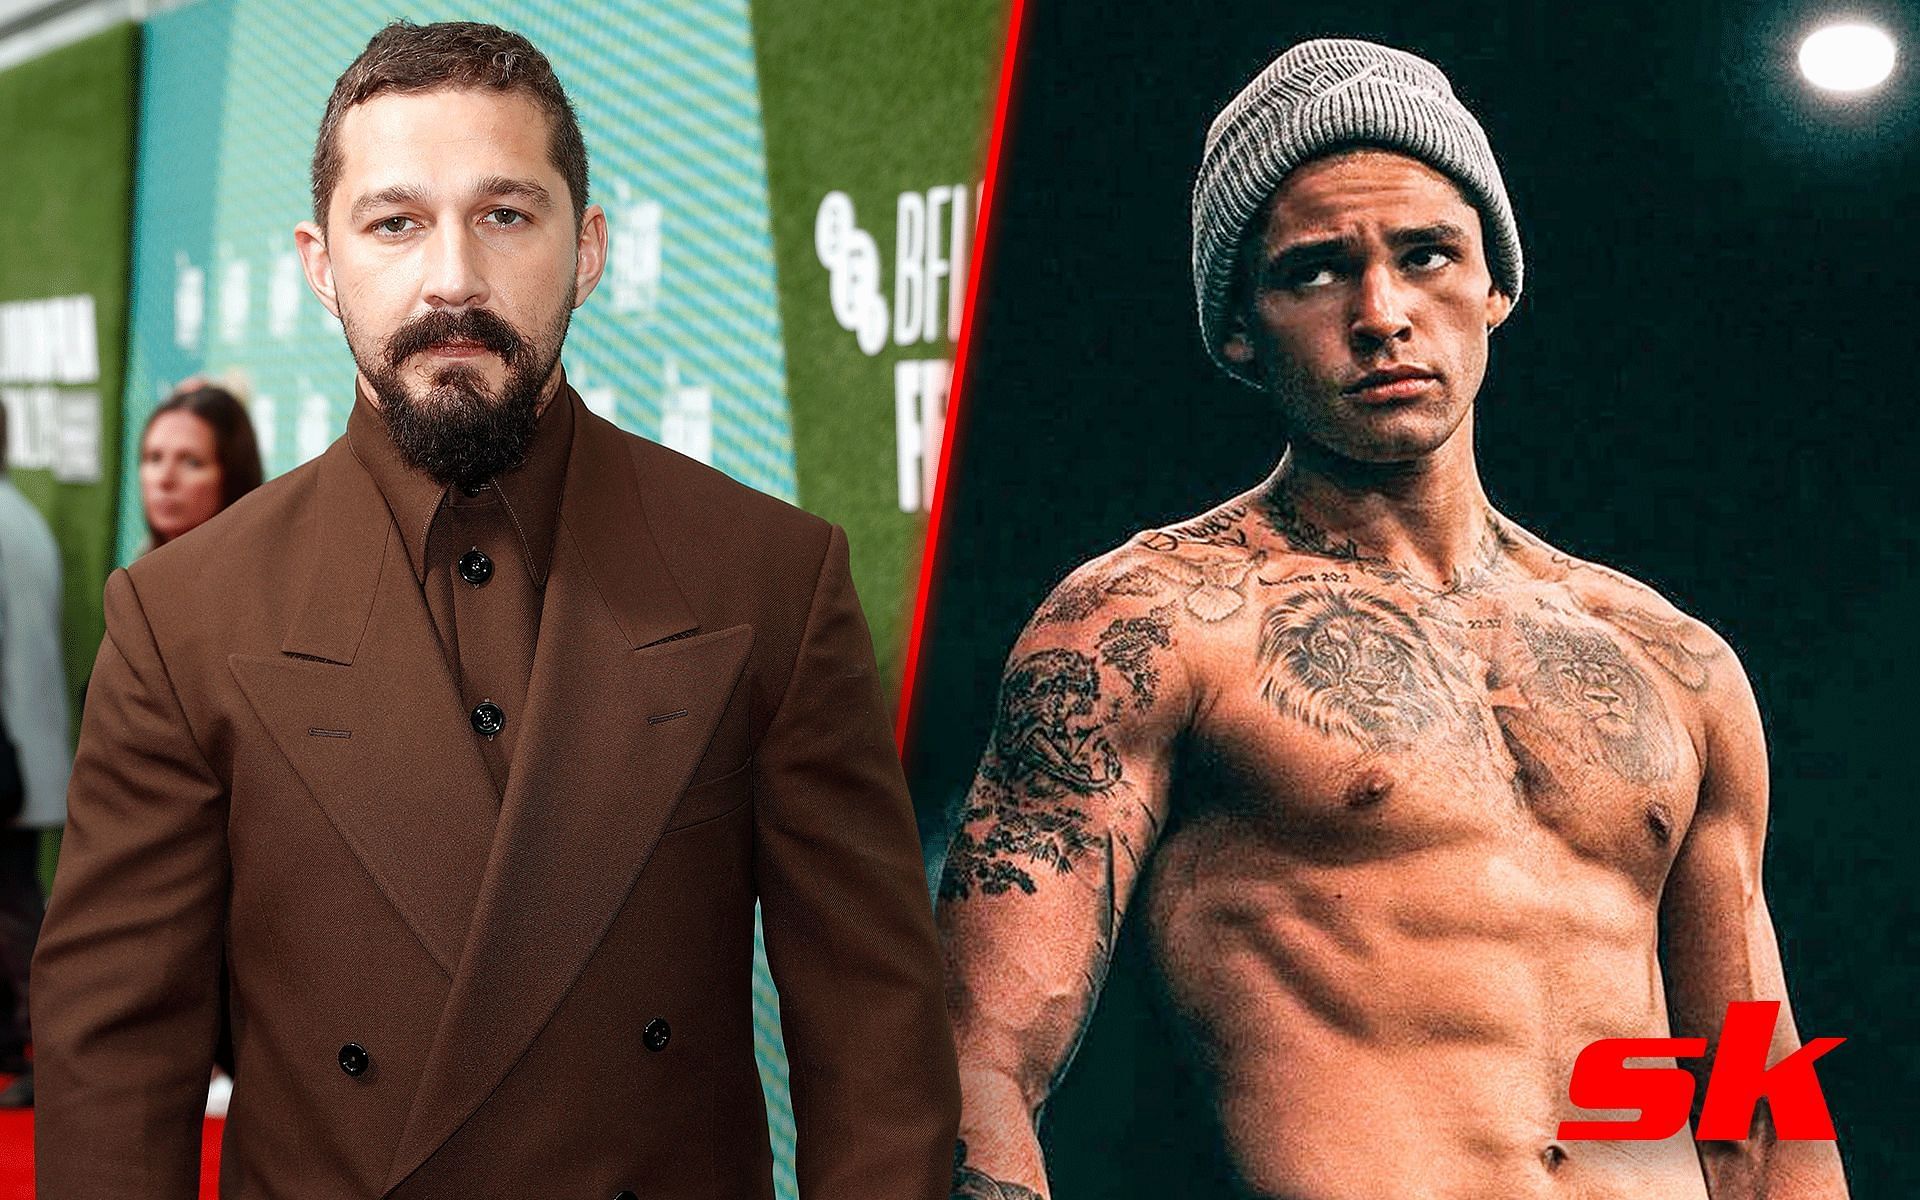 Ryan Garcia (right) and Shia Labeouf (left) go back and forth on social media [Image via: Getty Images and @kingryan on Instagram] 